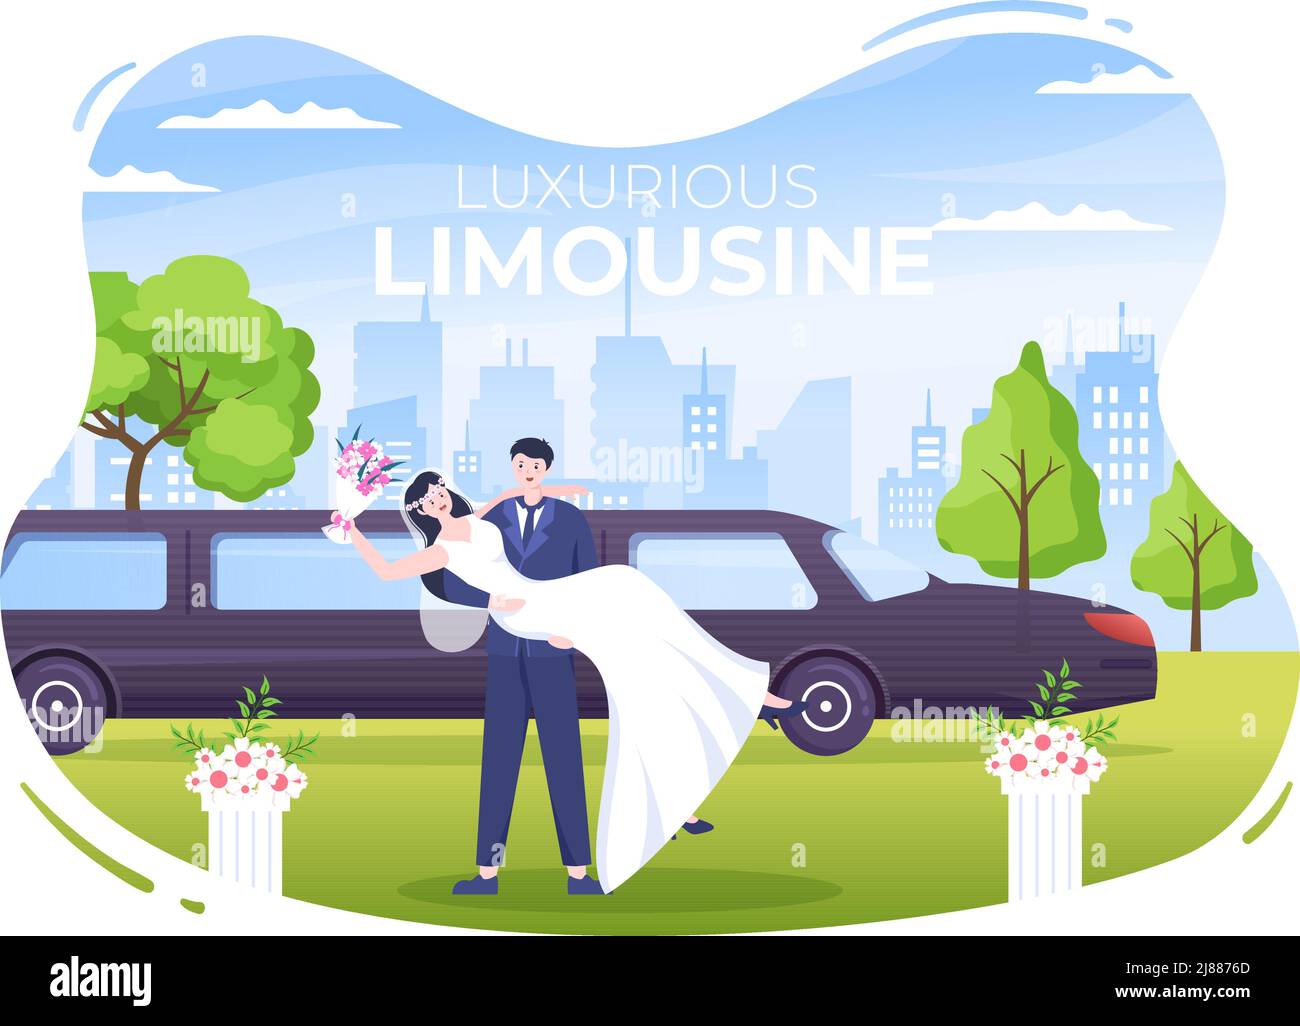 Limousine on Wedding Ceremony with Pictures of Car, Men and Women Wearing Married Dresses in Flat Cartoon Illustration Stock Vector